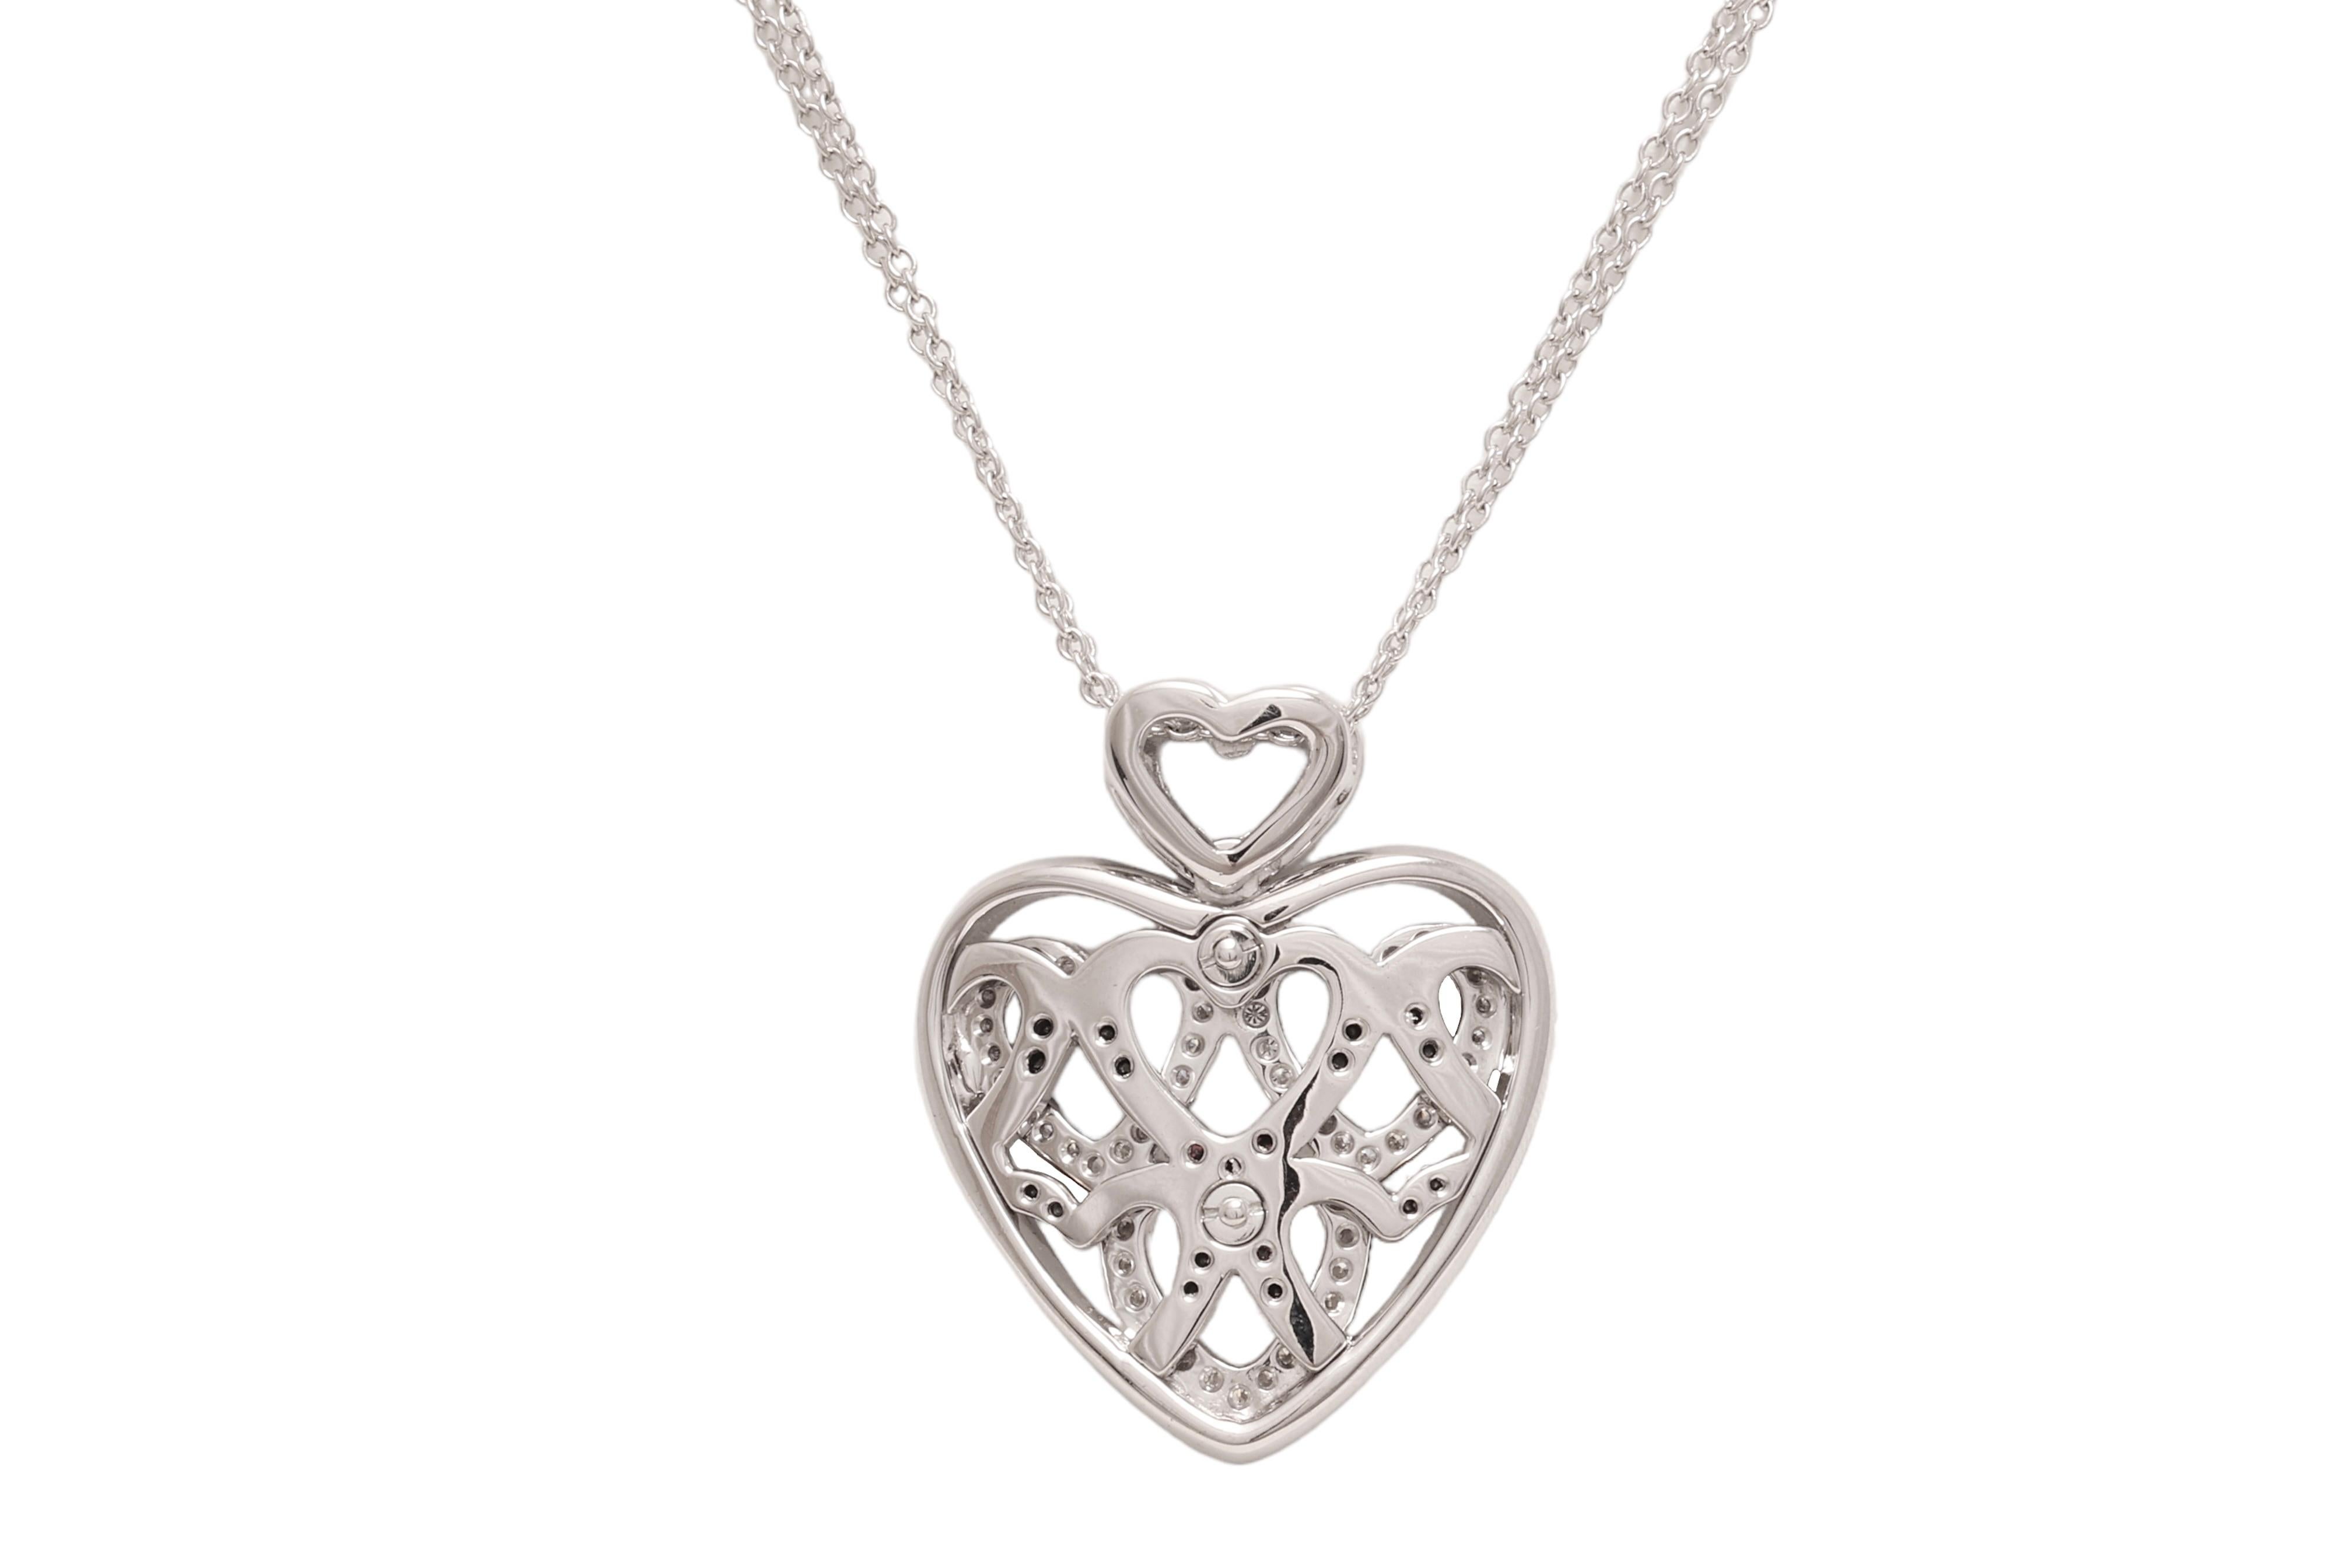  18 kt. White Gold Heart Necklace With 1 ct. White & Black Diamonds  For Sale 1